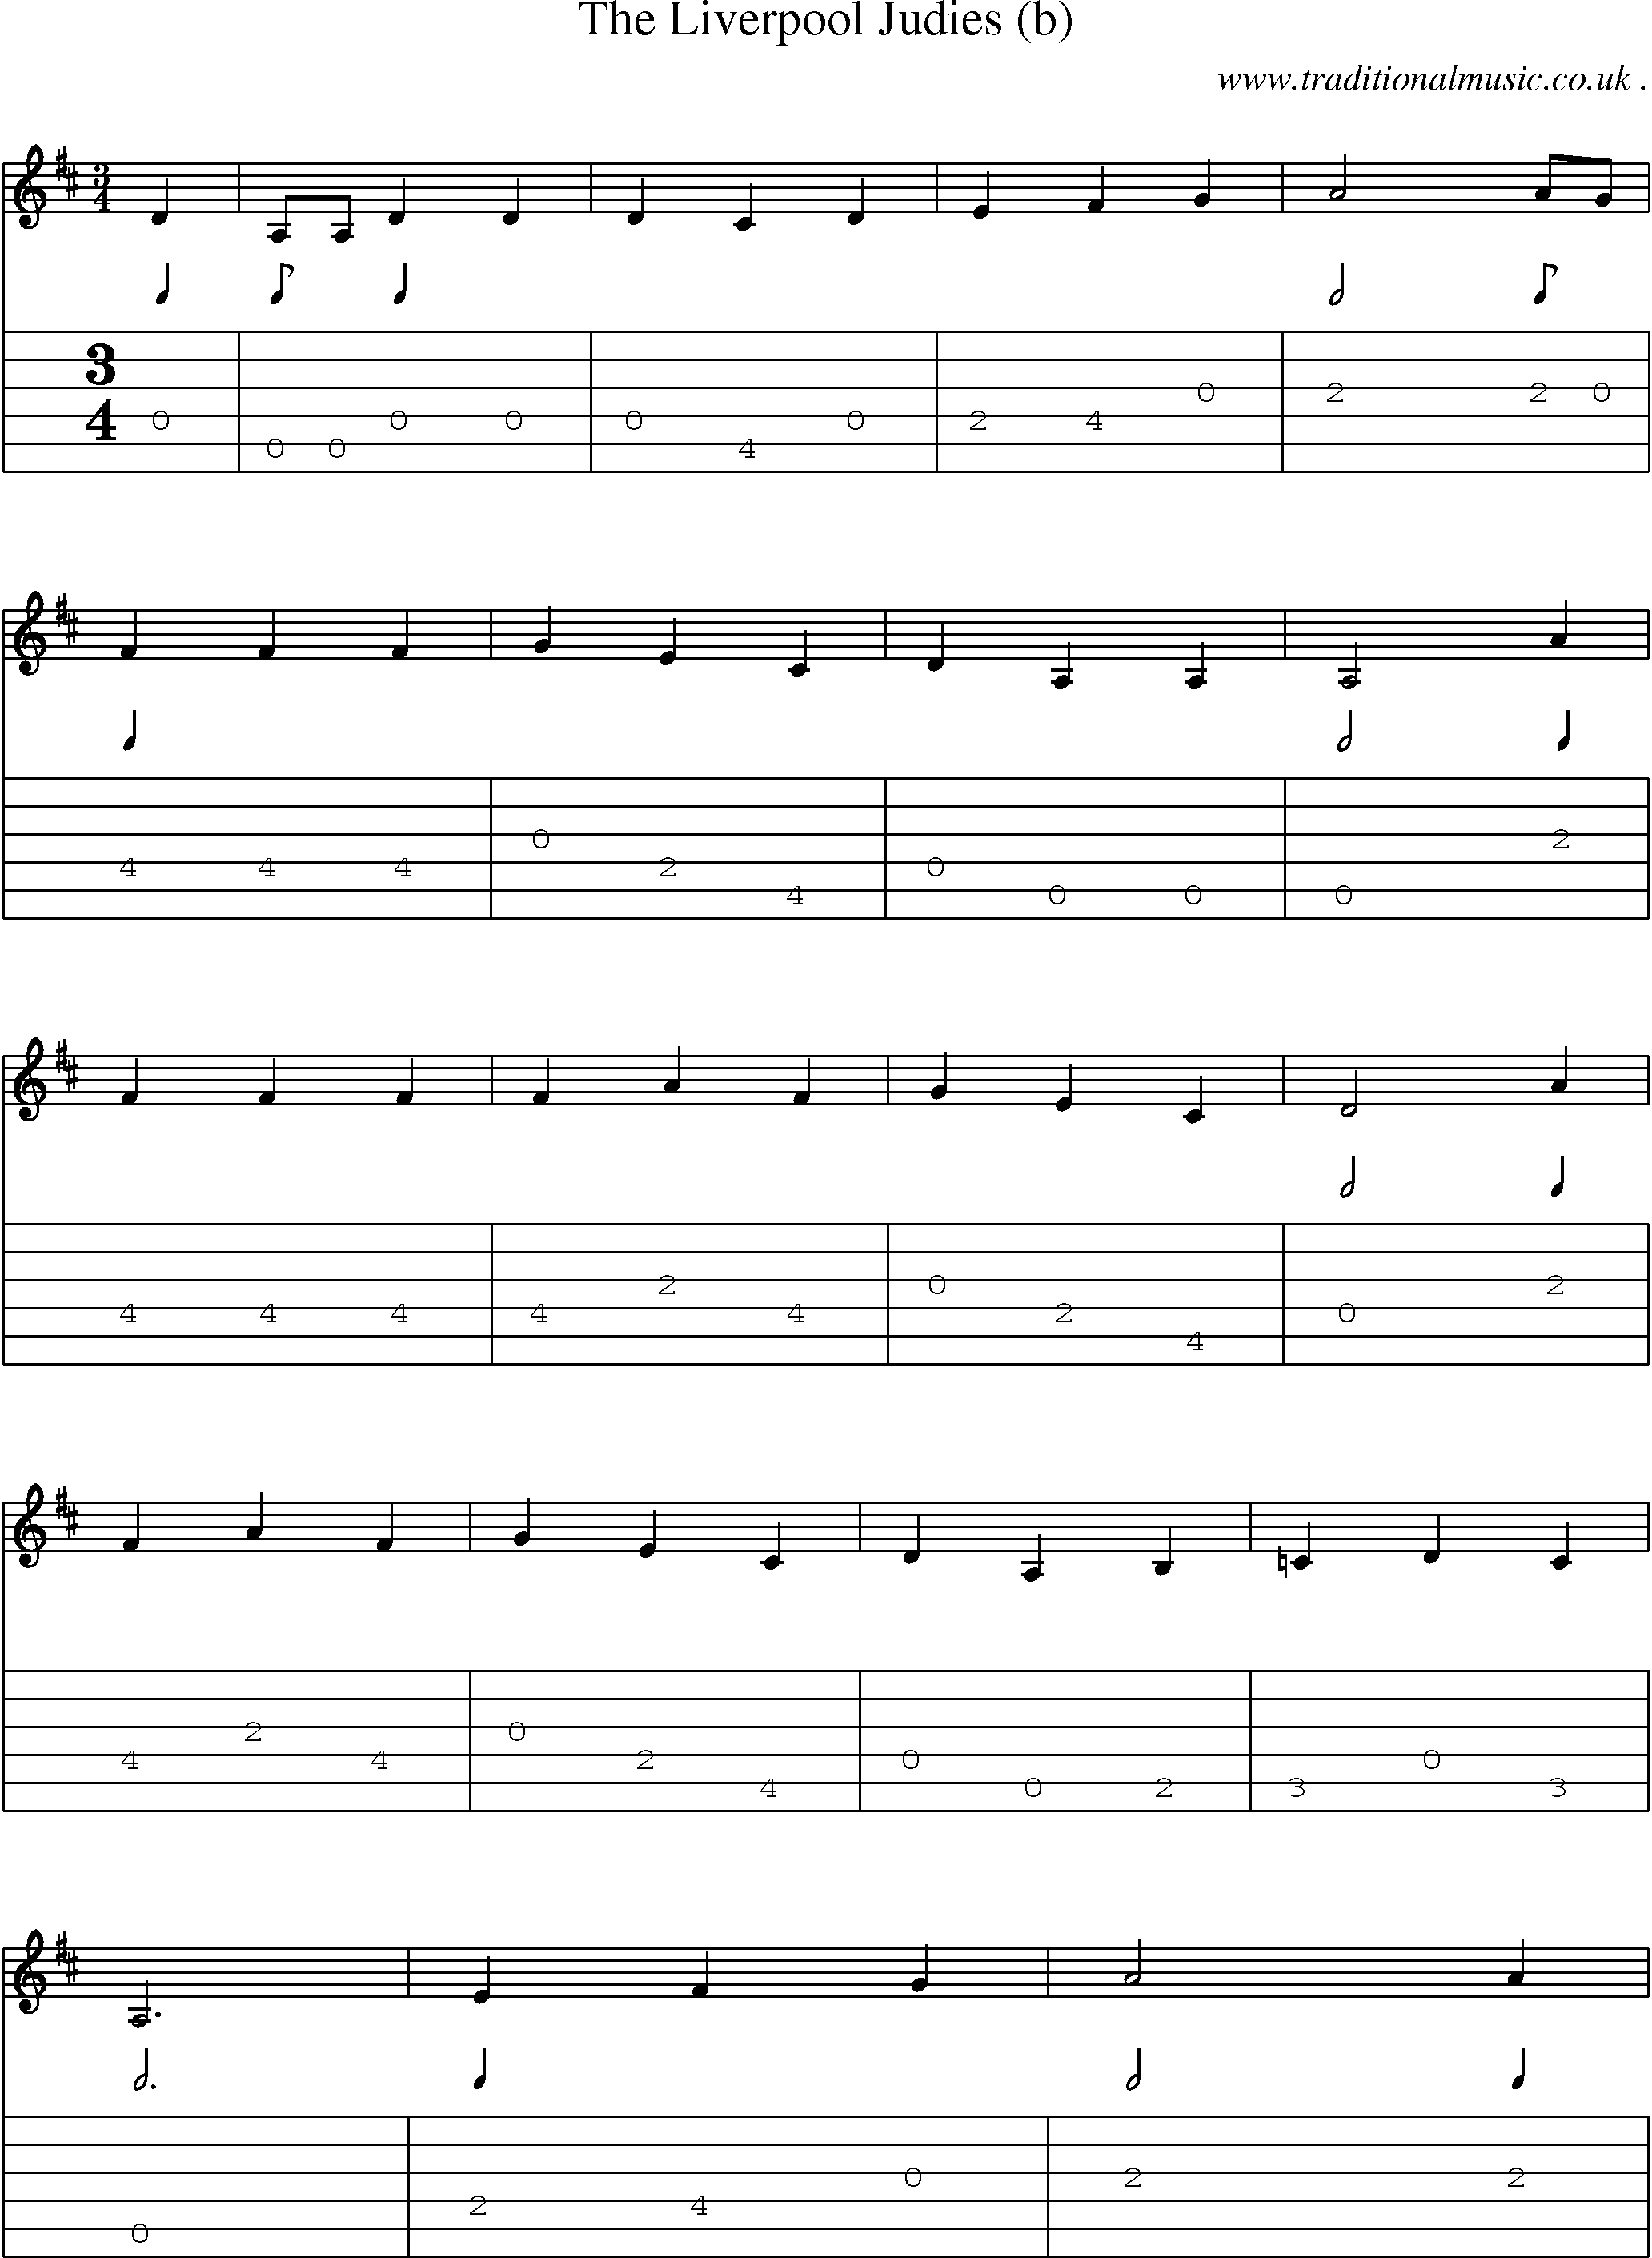 Sheet-Music and Guitar Tabs for The Liverpool Judies (b)